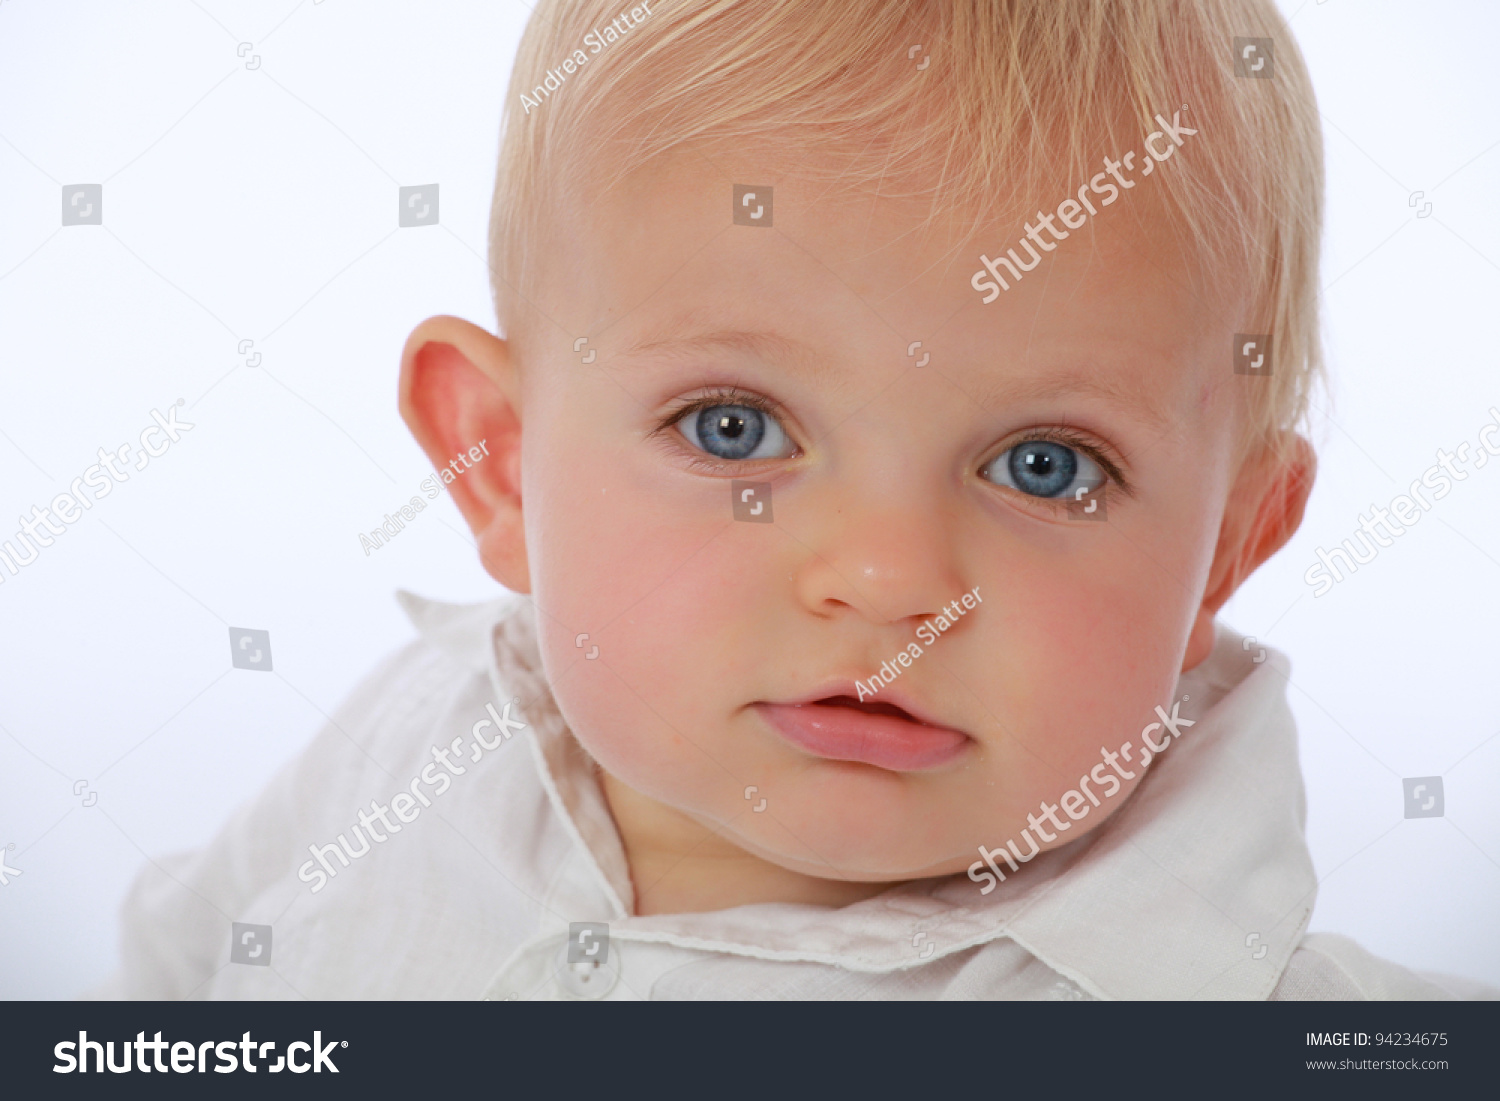 Adorable Cute Baby Face Pulling Funny Faces Smiling Stock Photo ...